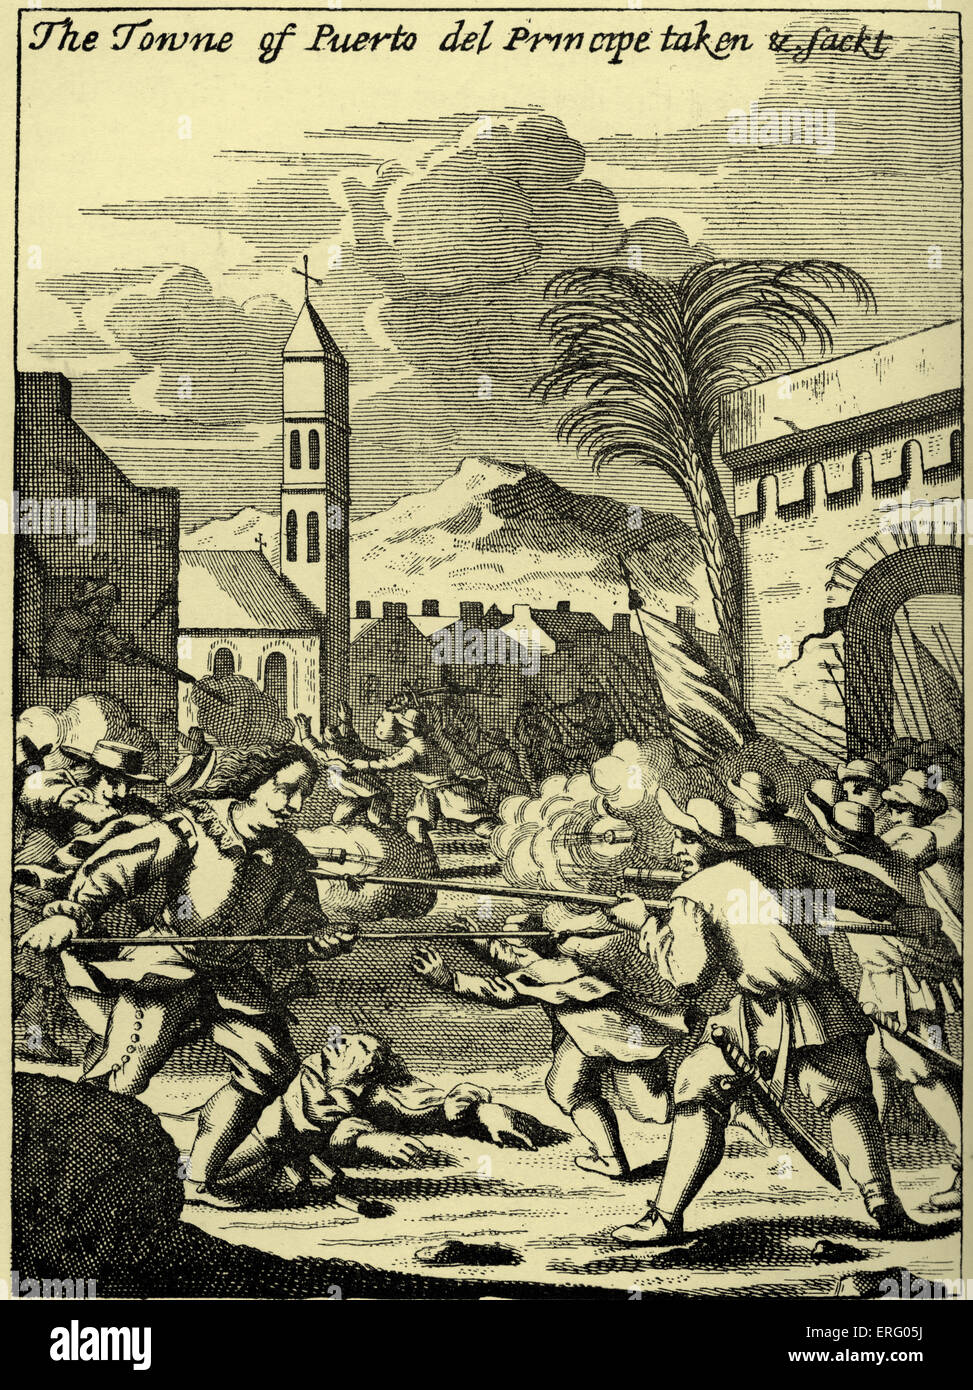 The Towne of Puerto del Principe taken & sackt', engraving. The Welsh privateer, Sir Henry Morgan, capturing and sacking Puerto del Principe, (present-day Camagüey, Cuba). HM: famous privateers in the Caribbean in the 1660s and 1670s, born c. 1635 – 1688/ 9 (?) Stock Photo